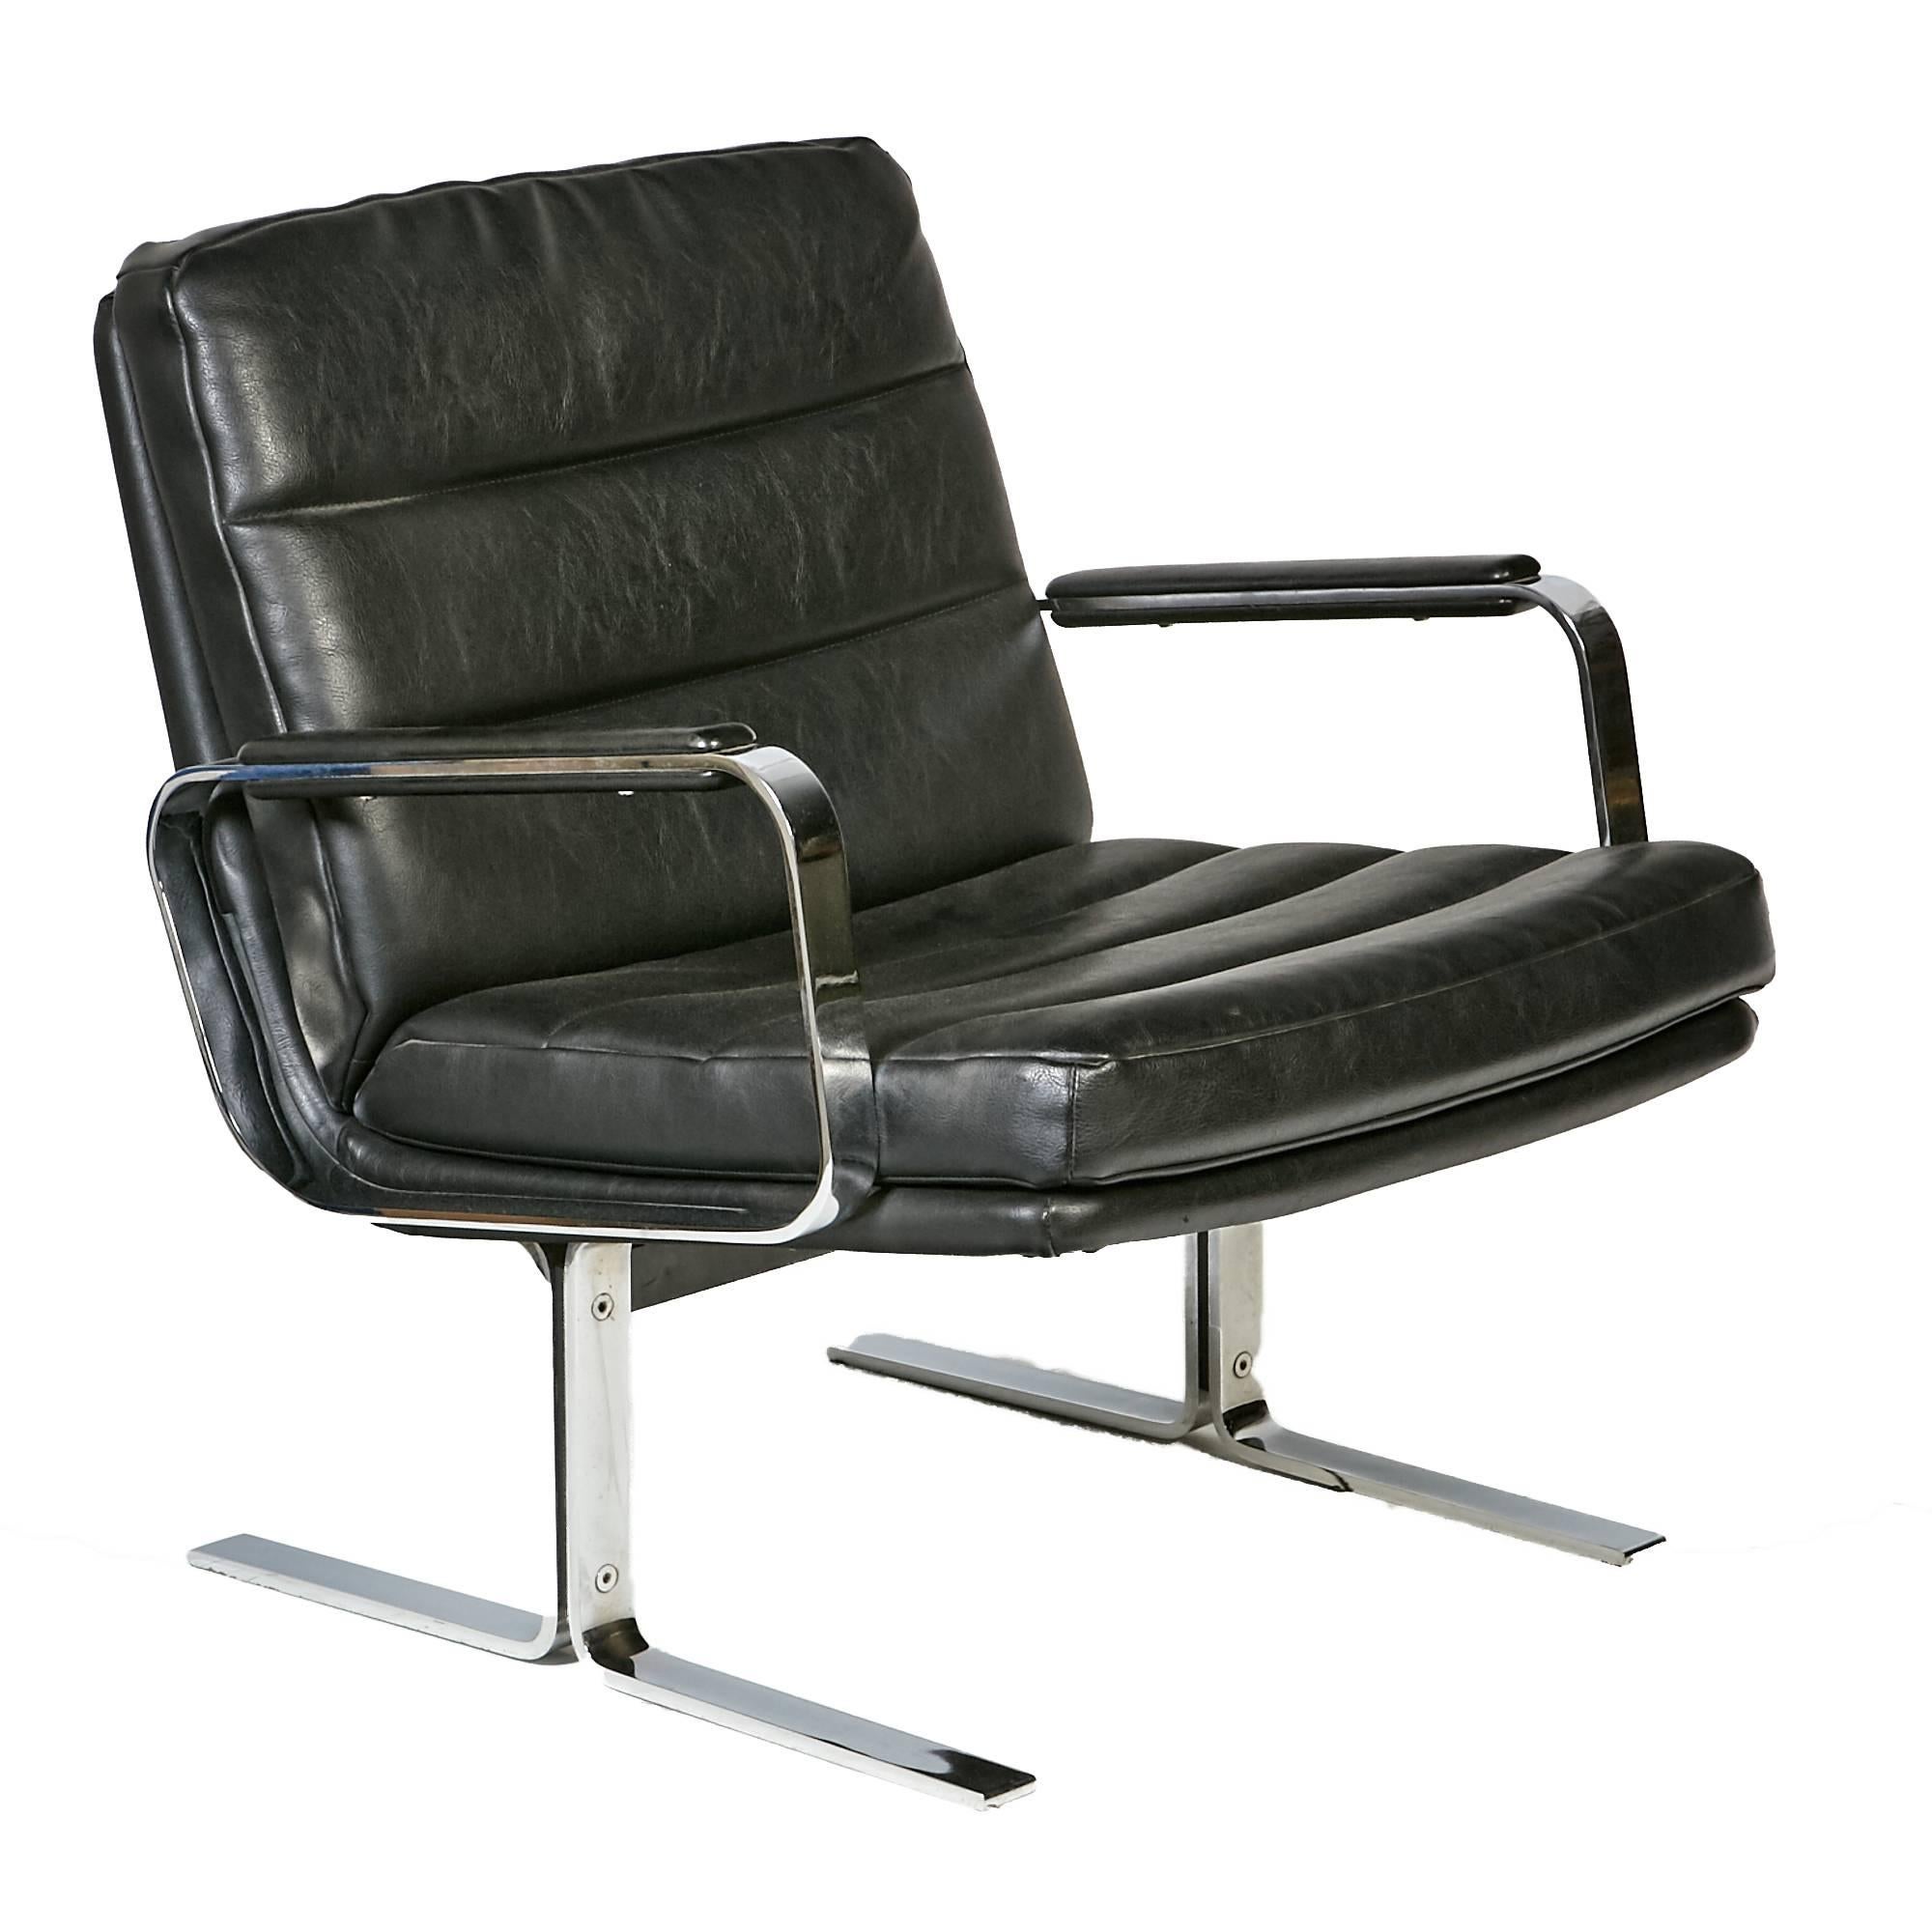 1970s Airport-Style Living Room Set by Bernd Münzebrock for Knoll For Sale 2